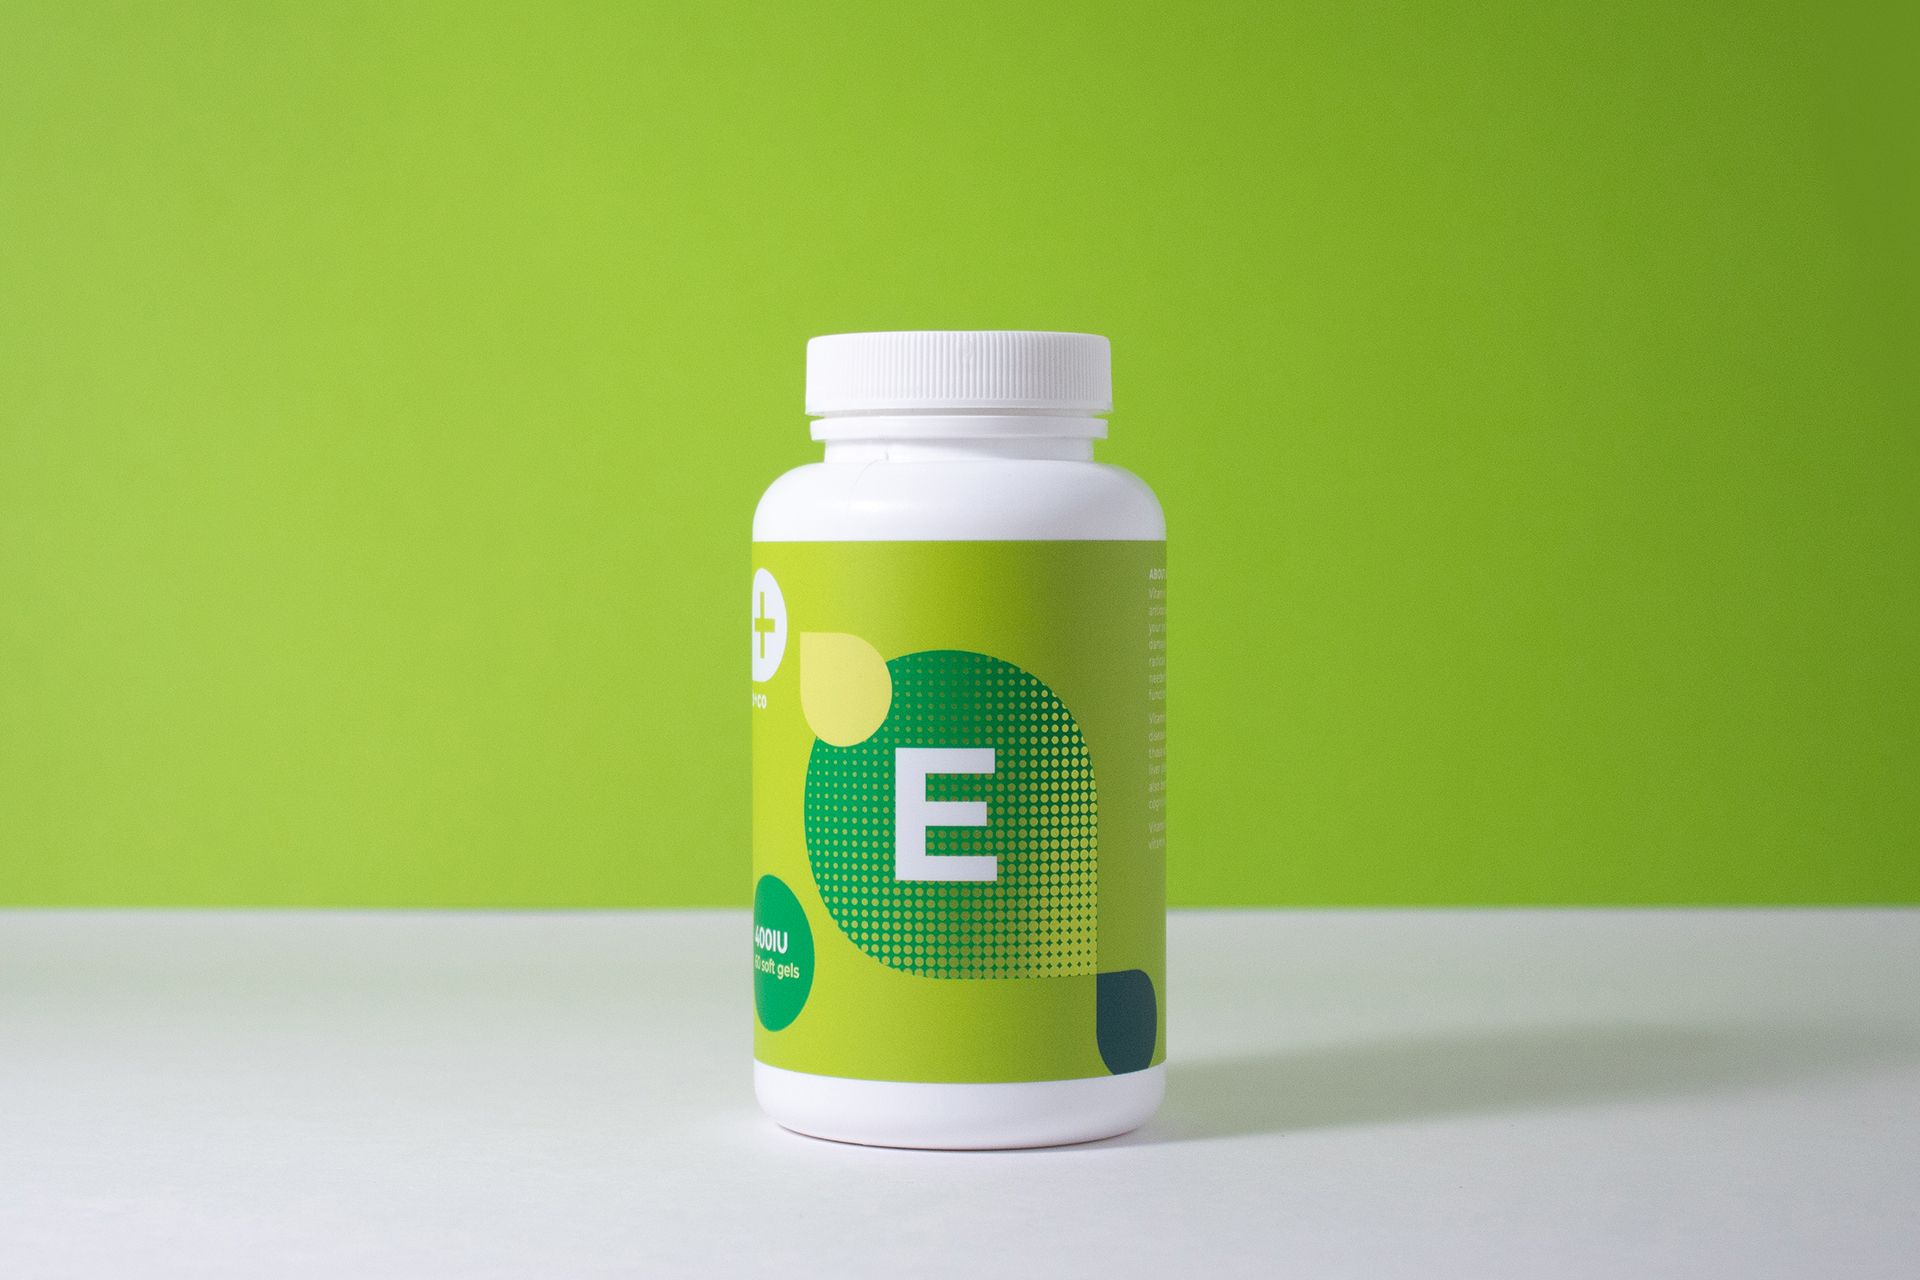 Bottle of vitamin E capsules with eye-catching metallic nutraceutical label packaging supplement label design.